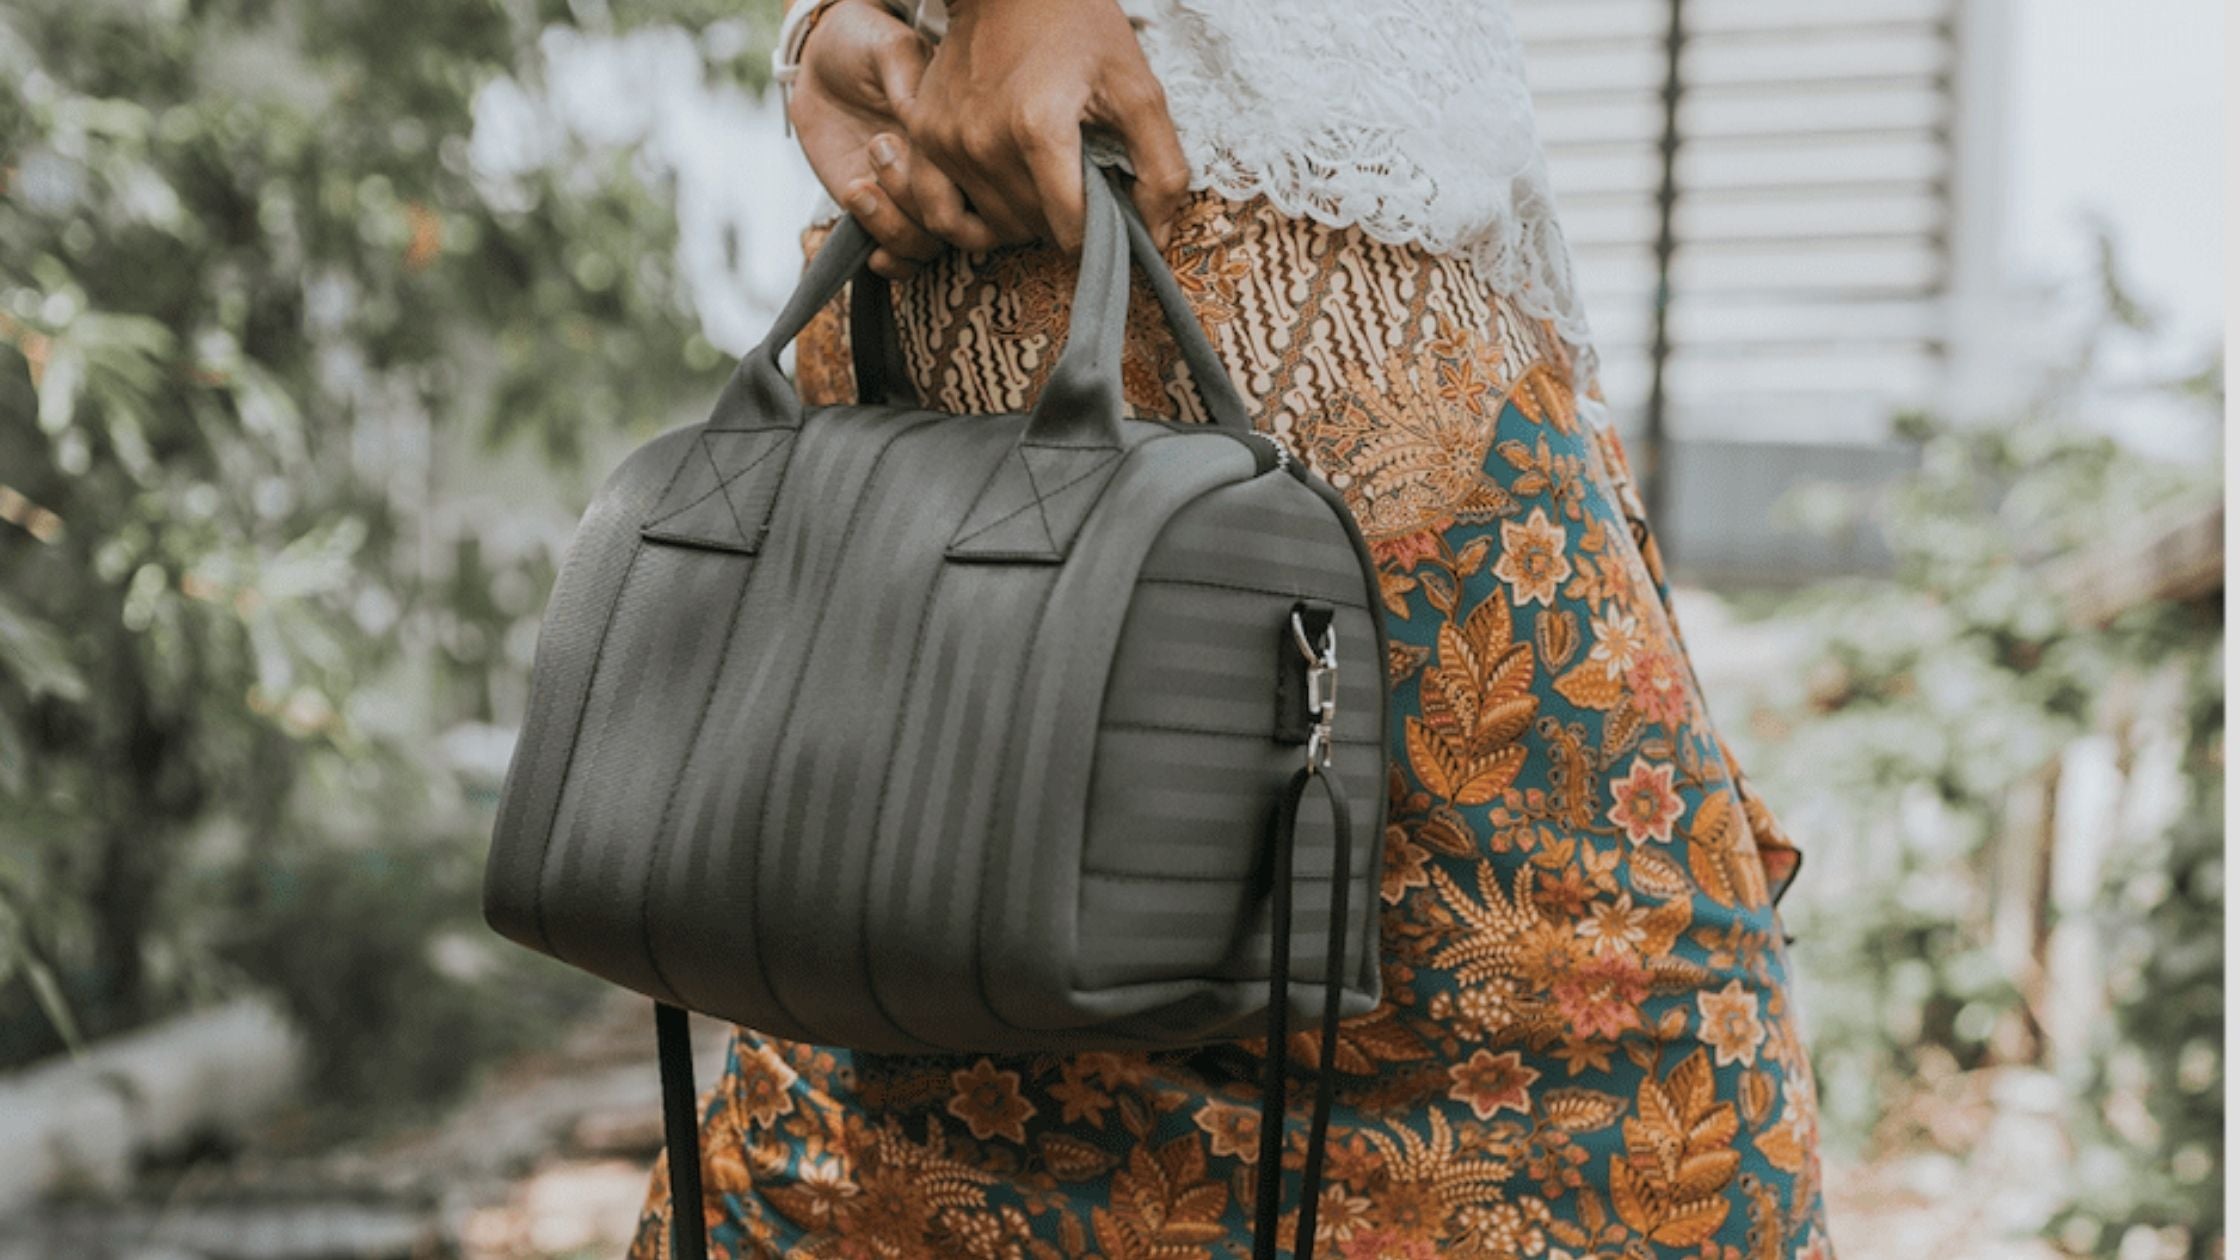 Everything You Need To Know About Vegan Leather Bags